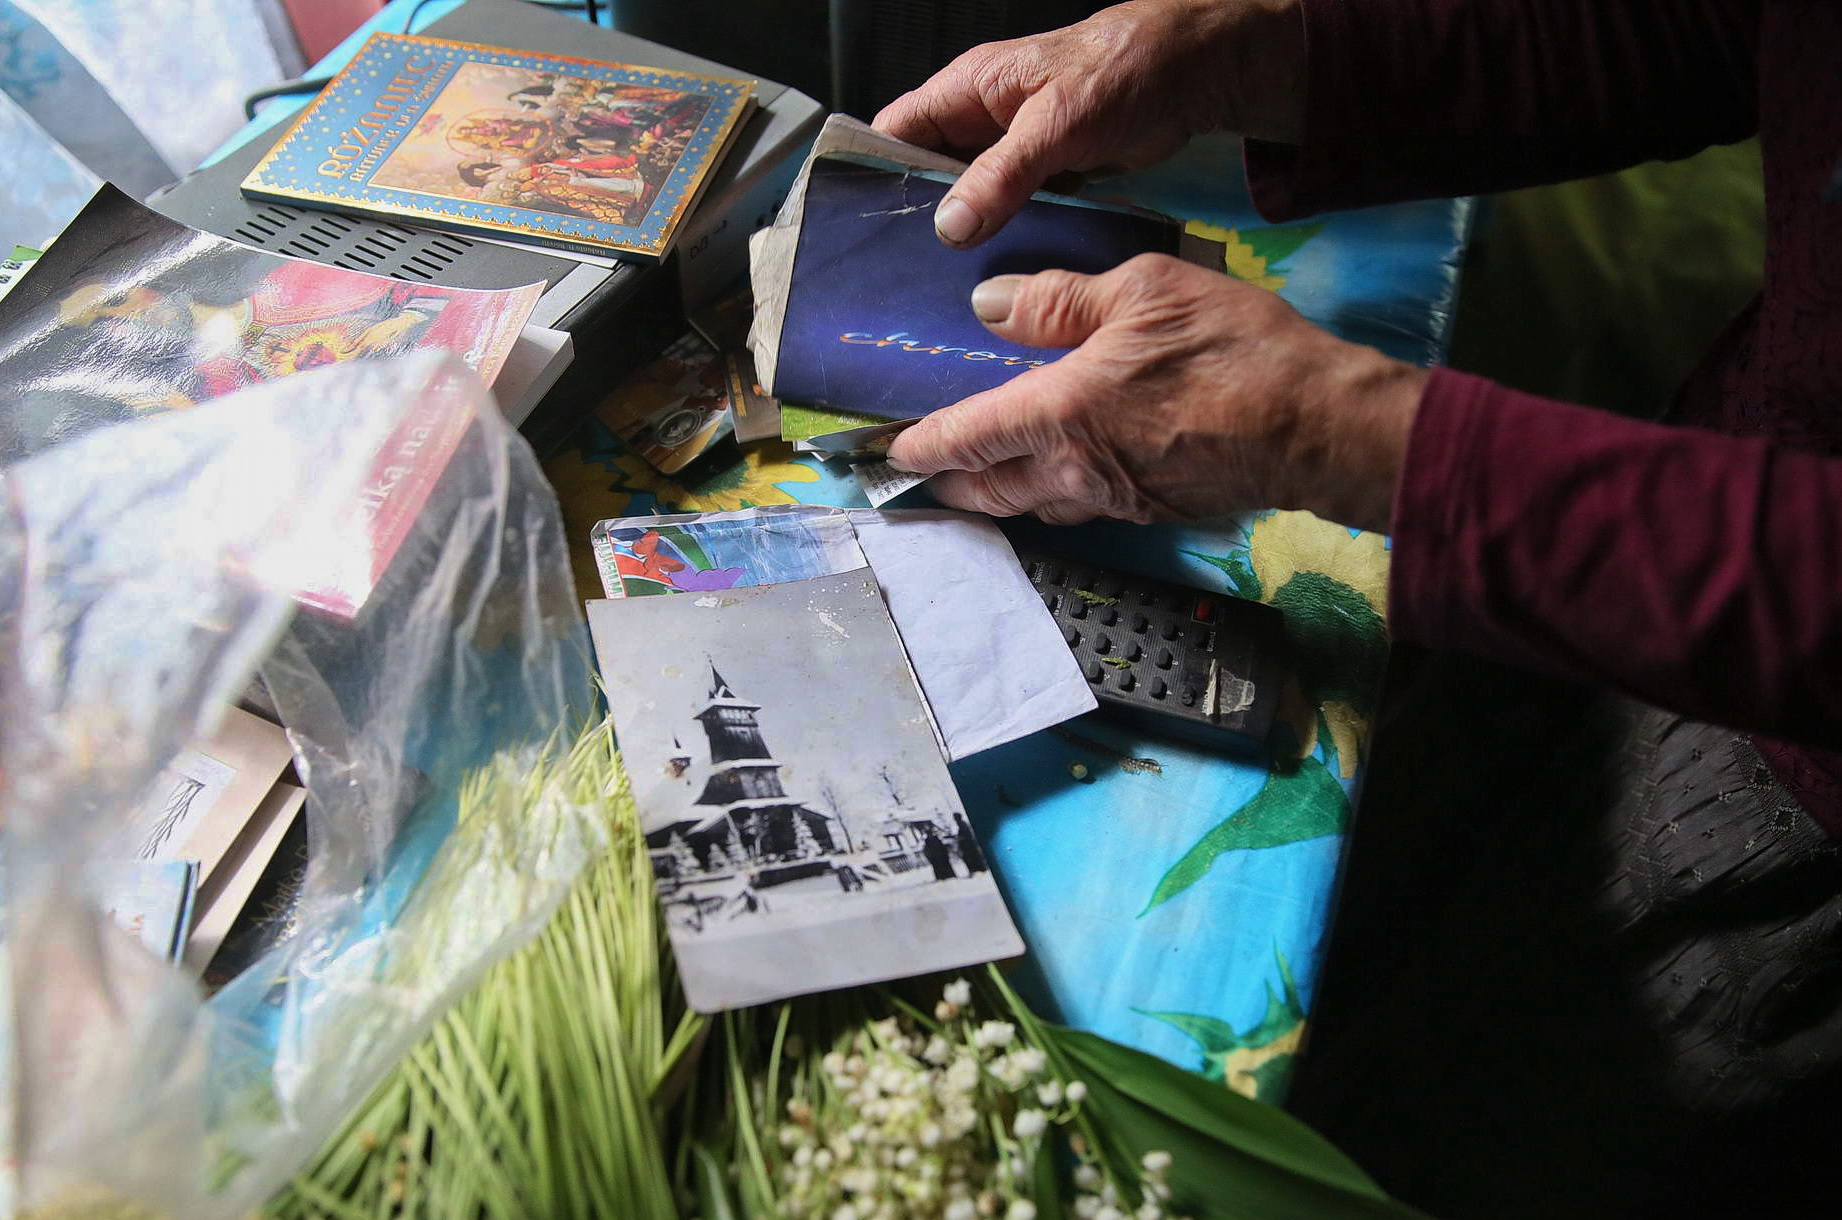 Oleksandra Vaseiko shows postcards and photos in her house in the village of Sokil in Volyn Oblast.